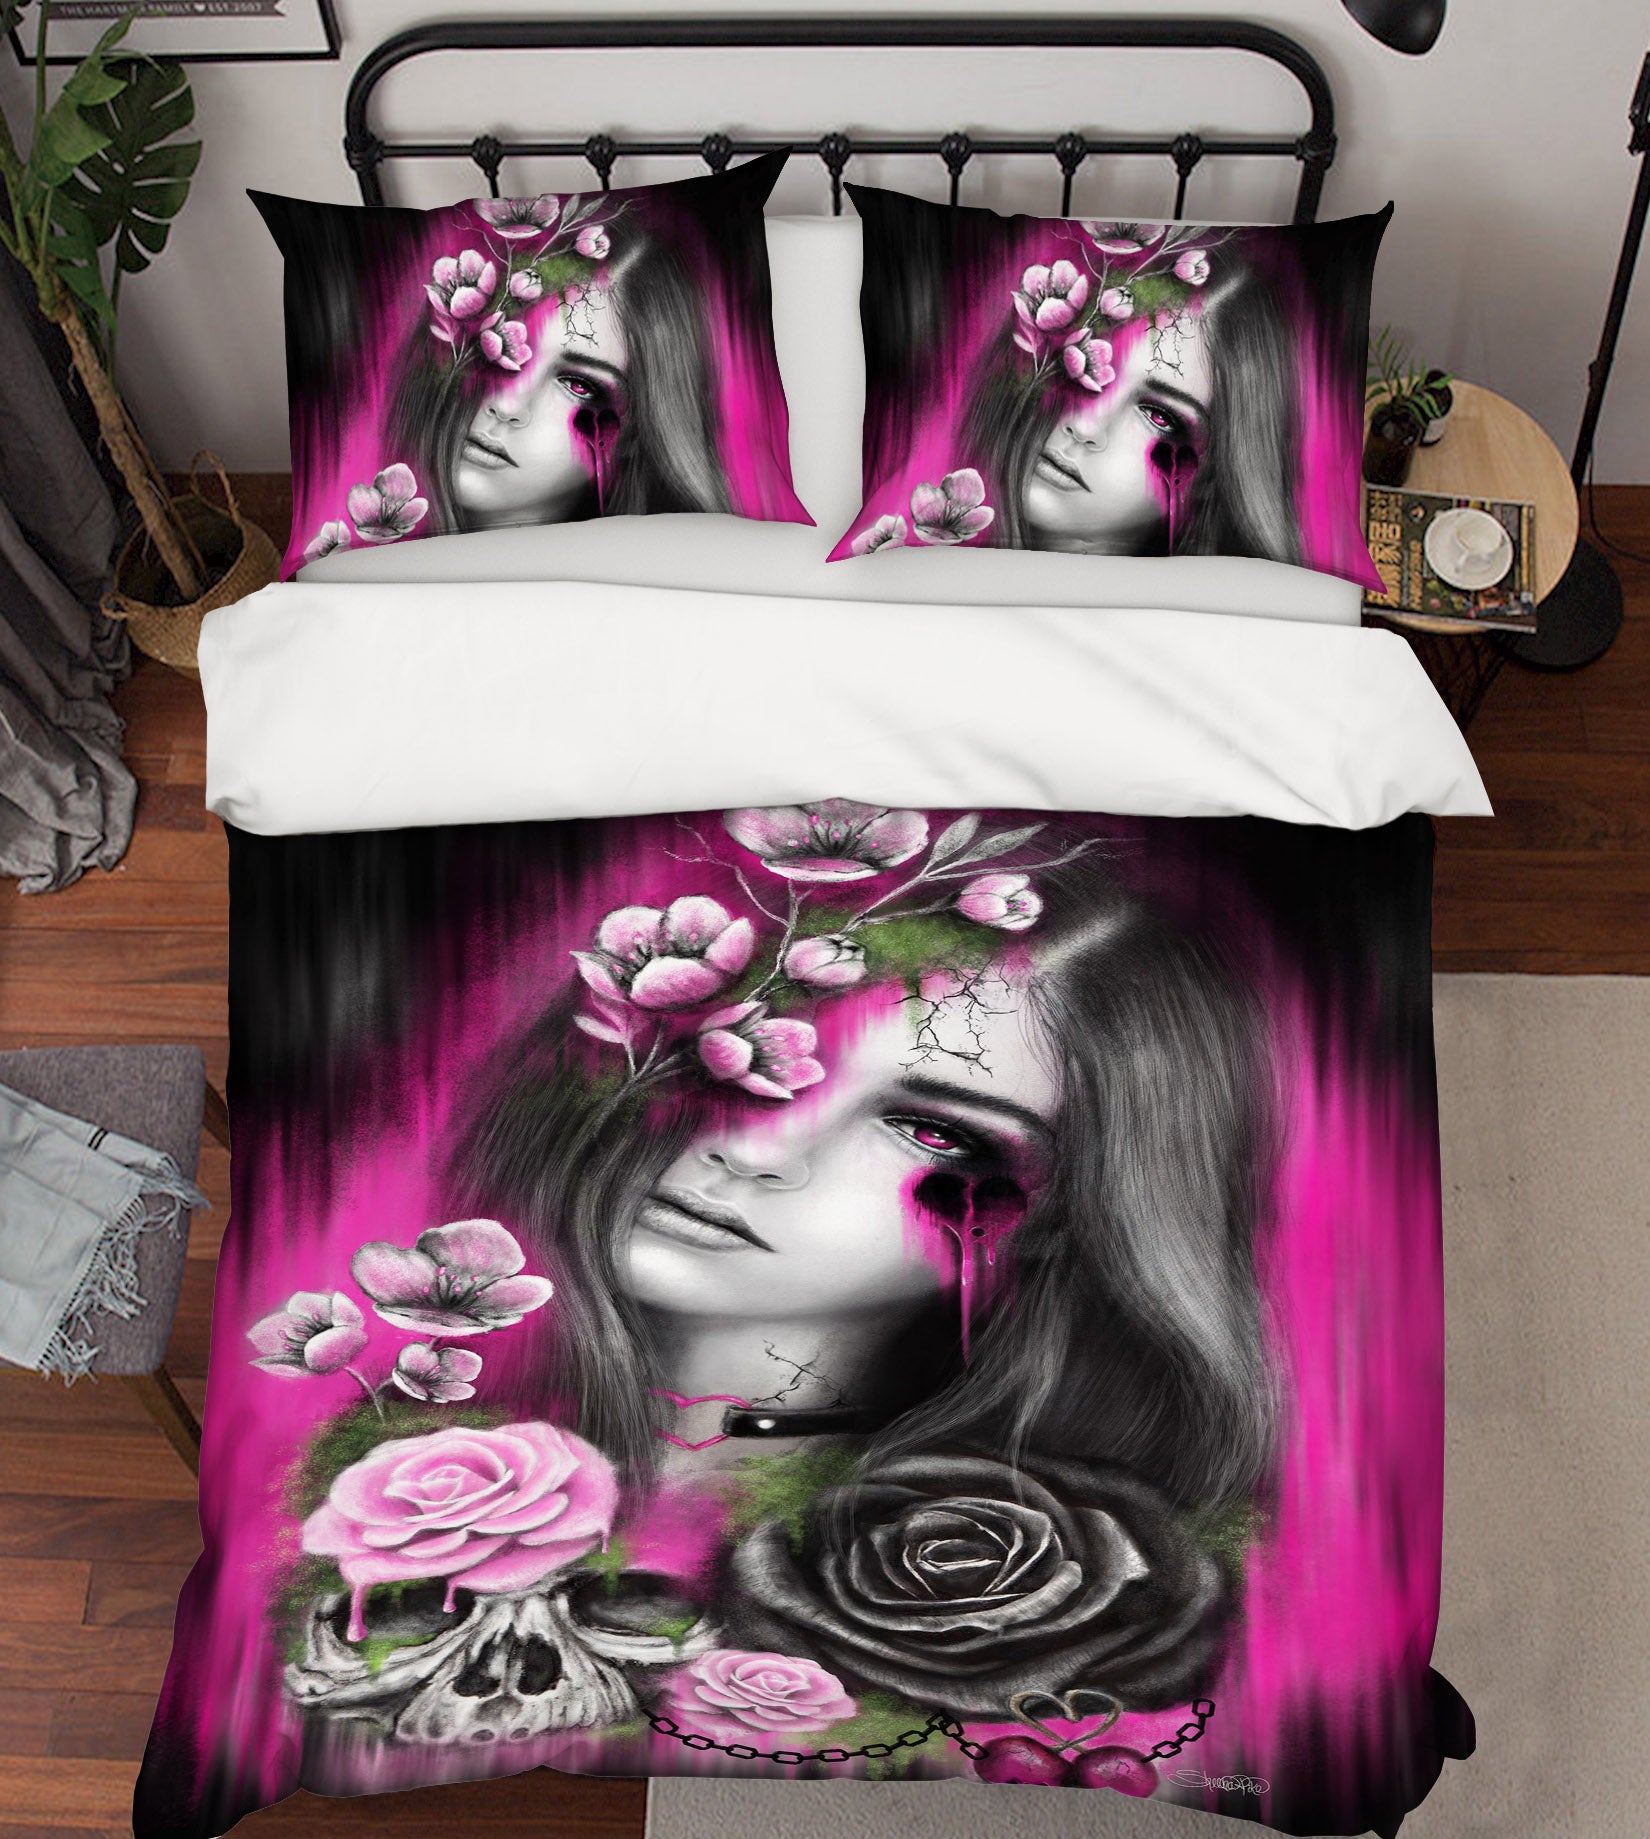 3D Pink Rose Woman 8599 Sheena Pike Bedding Bed Pillowcases Quilt Cover Duvet Cover